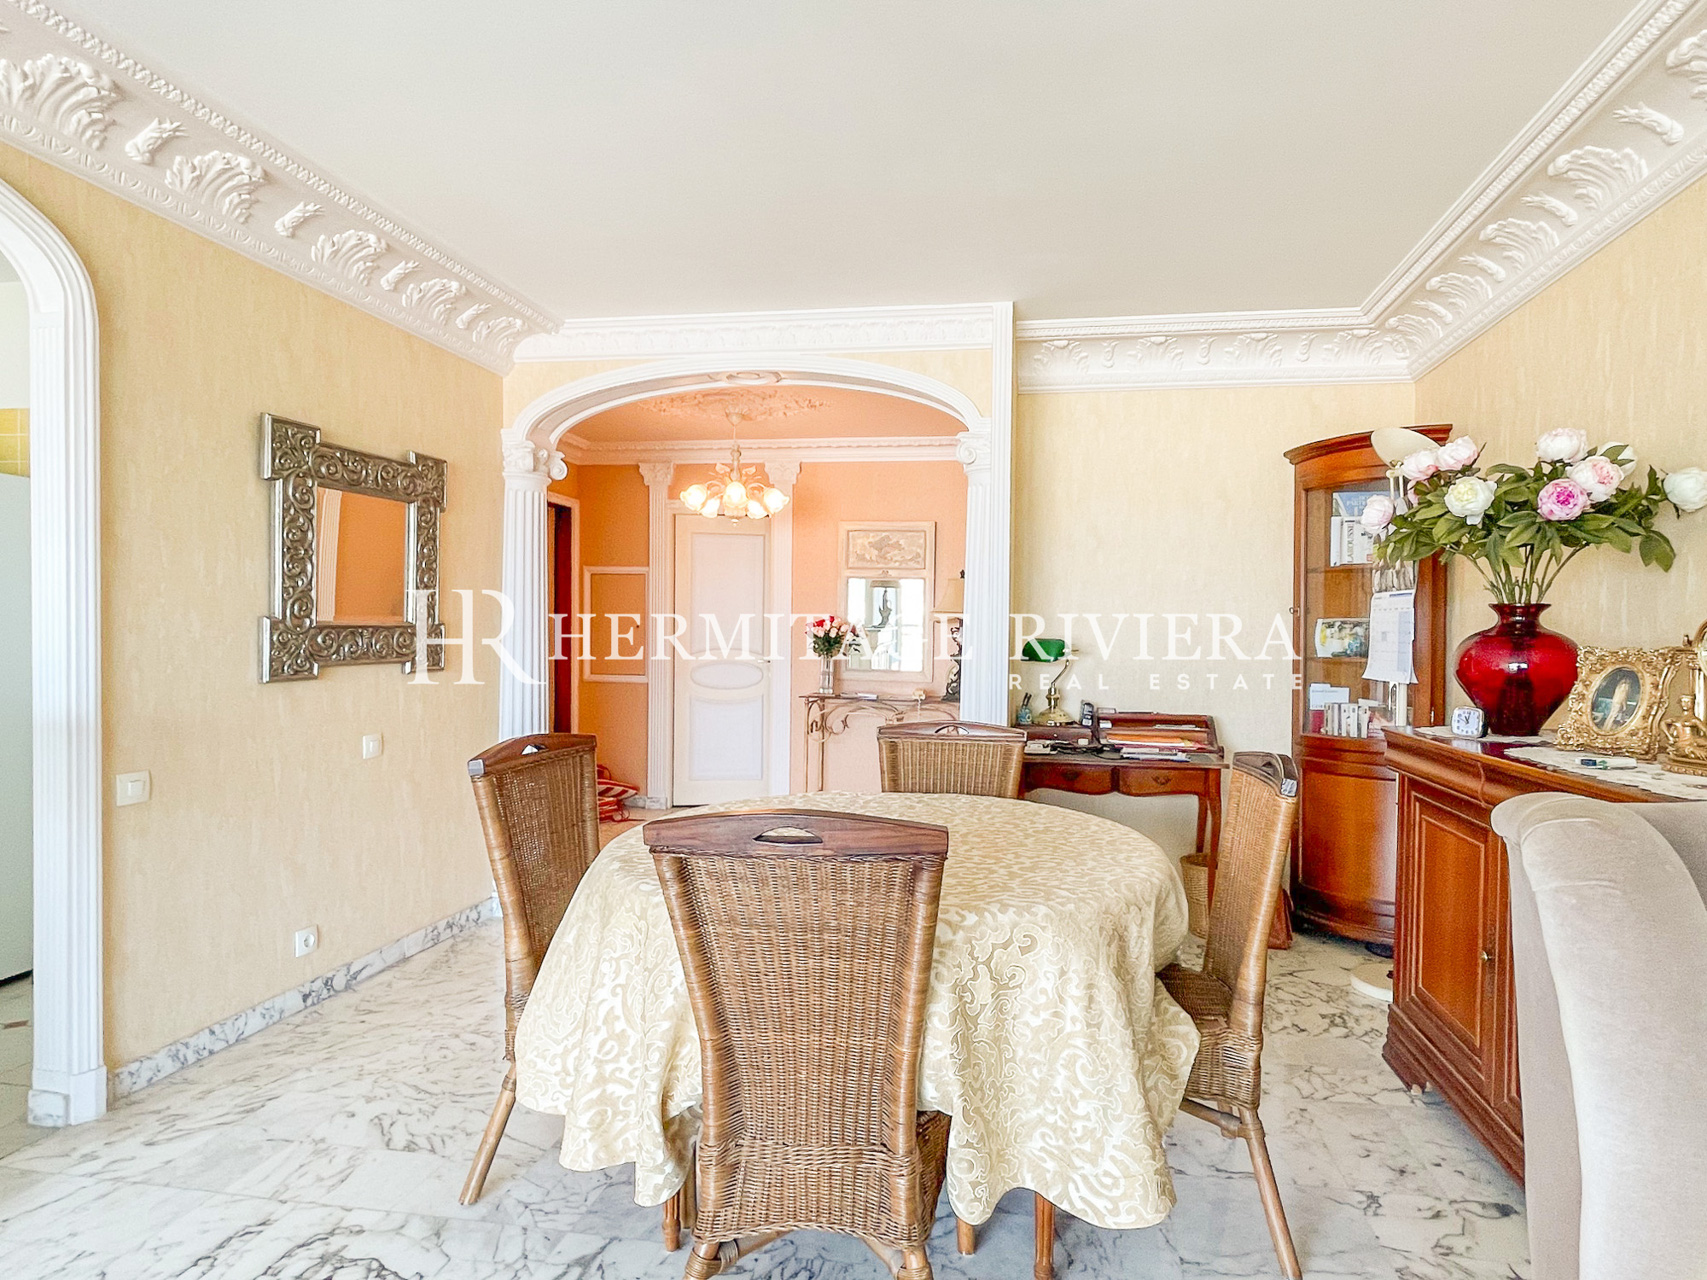 Top floor two bedroom apartment with views over Nice and the sea (image 5)